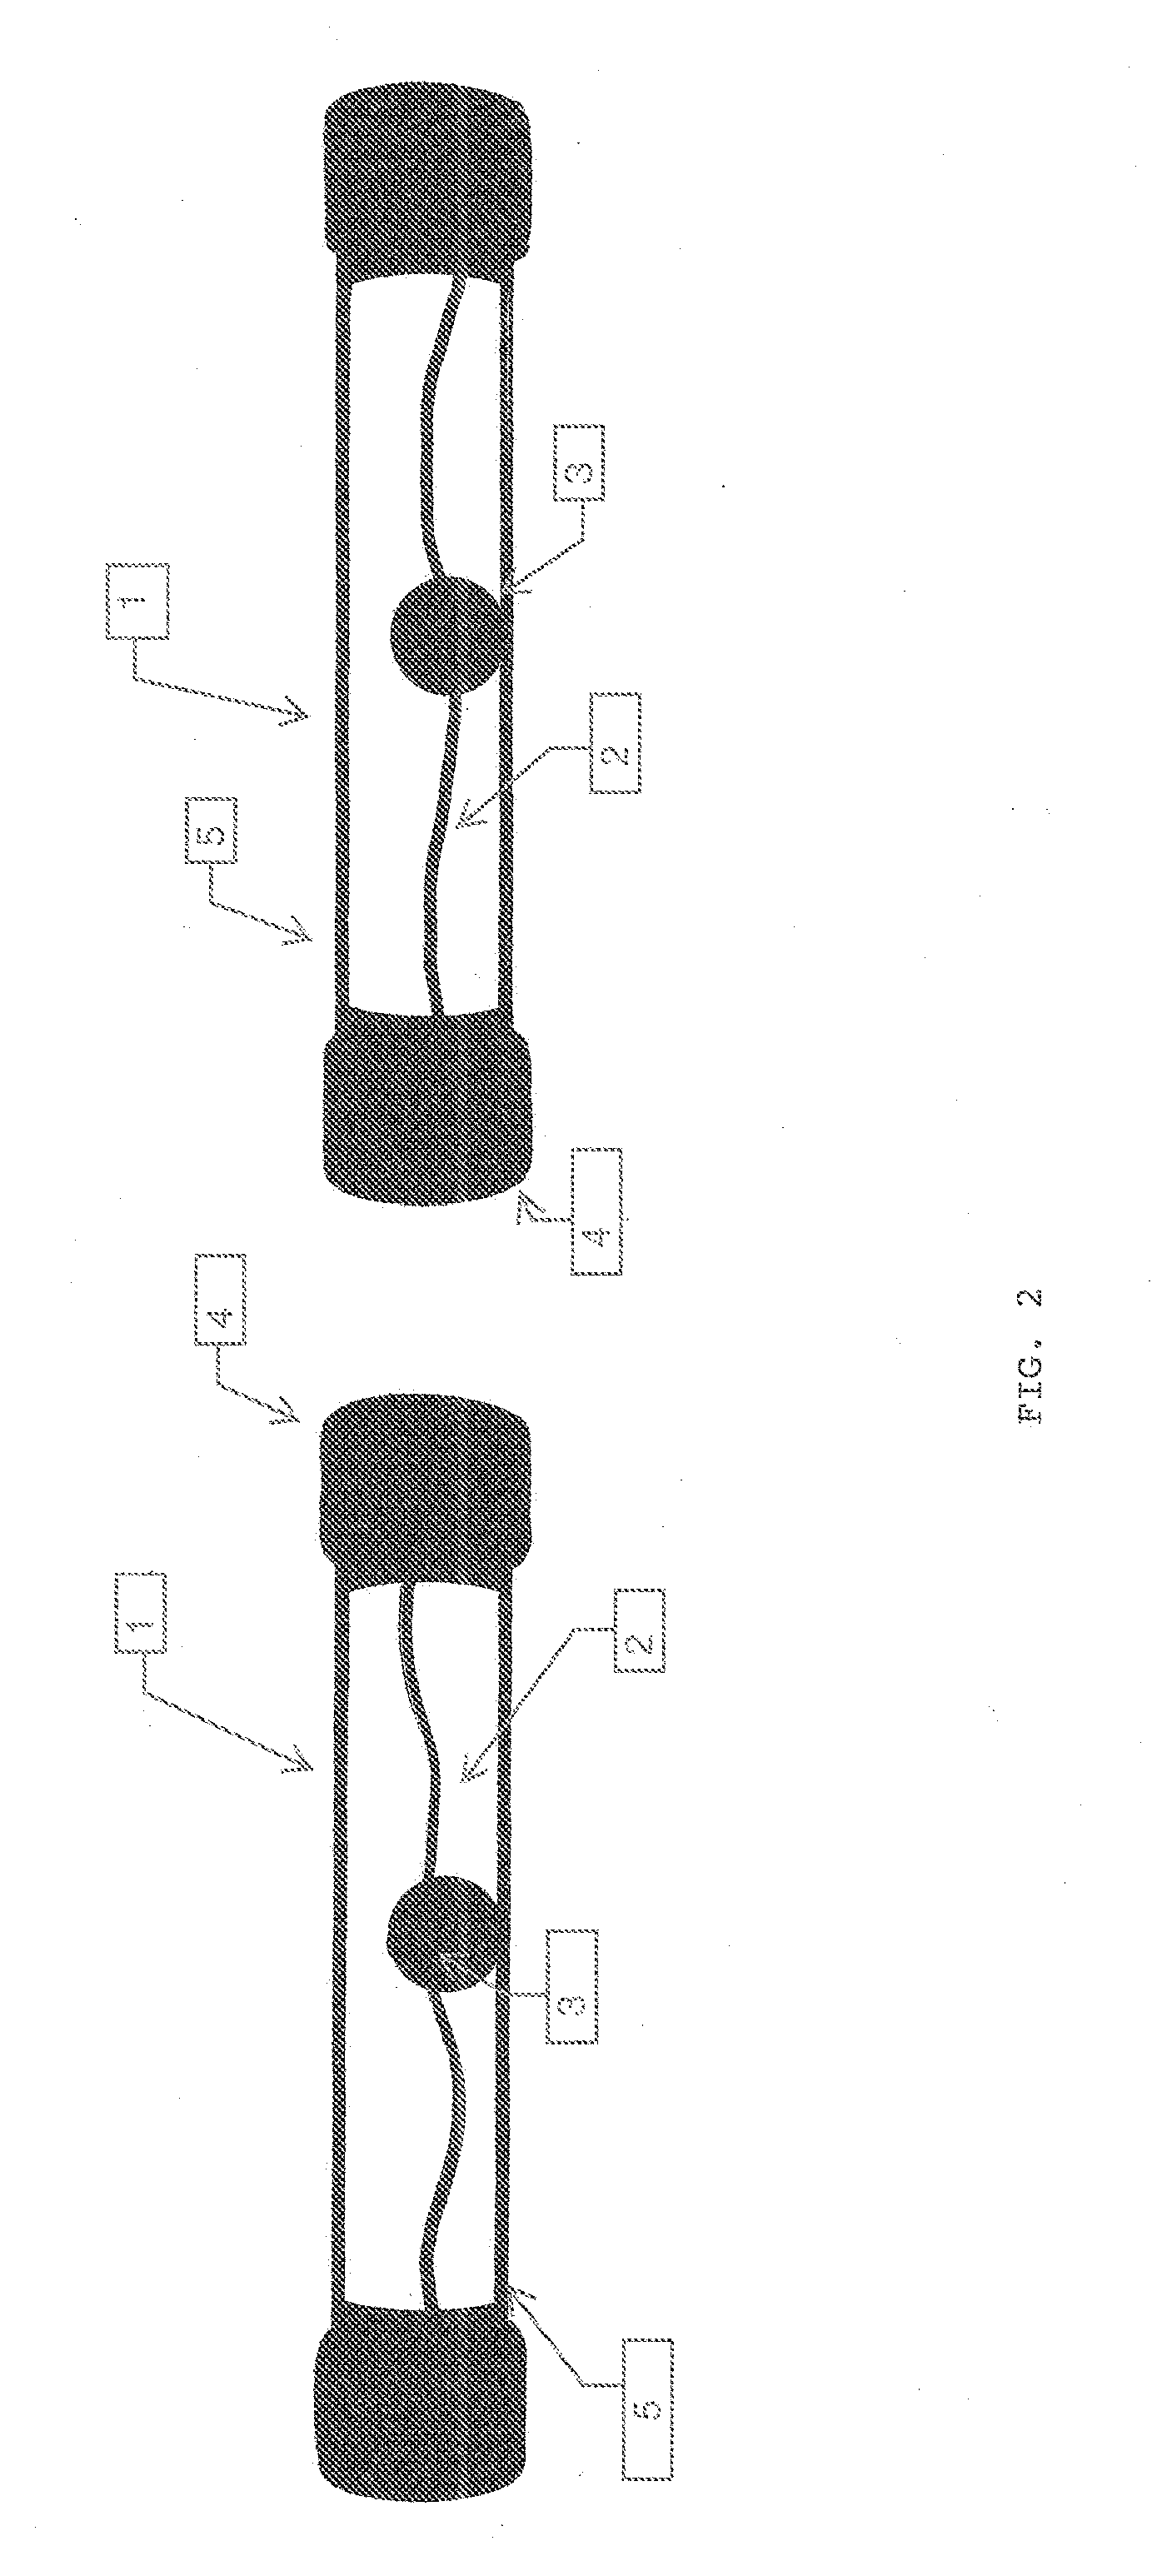 Method and Apparatus for Exercise, Strength and Physical Therapeutic Training